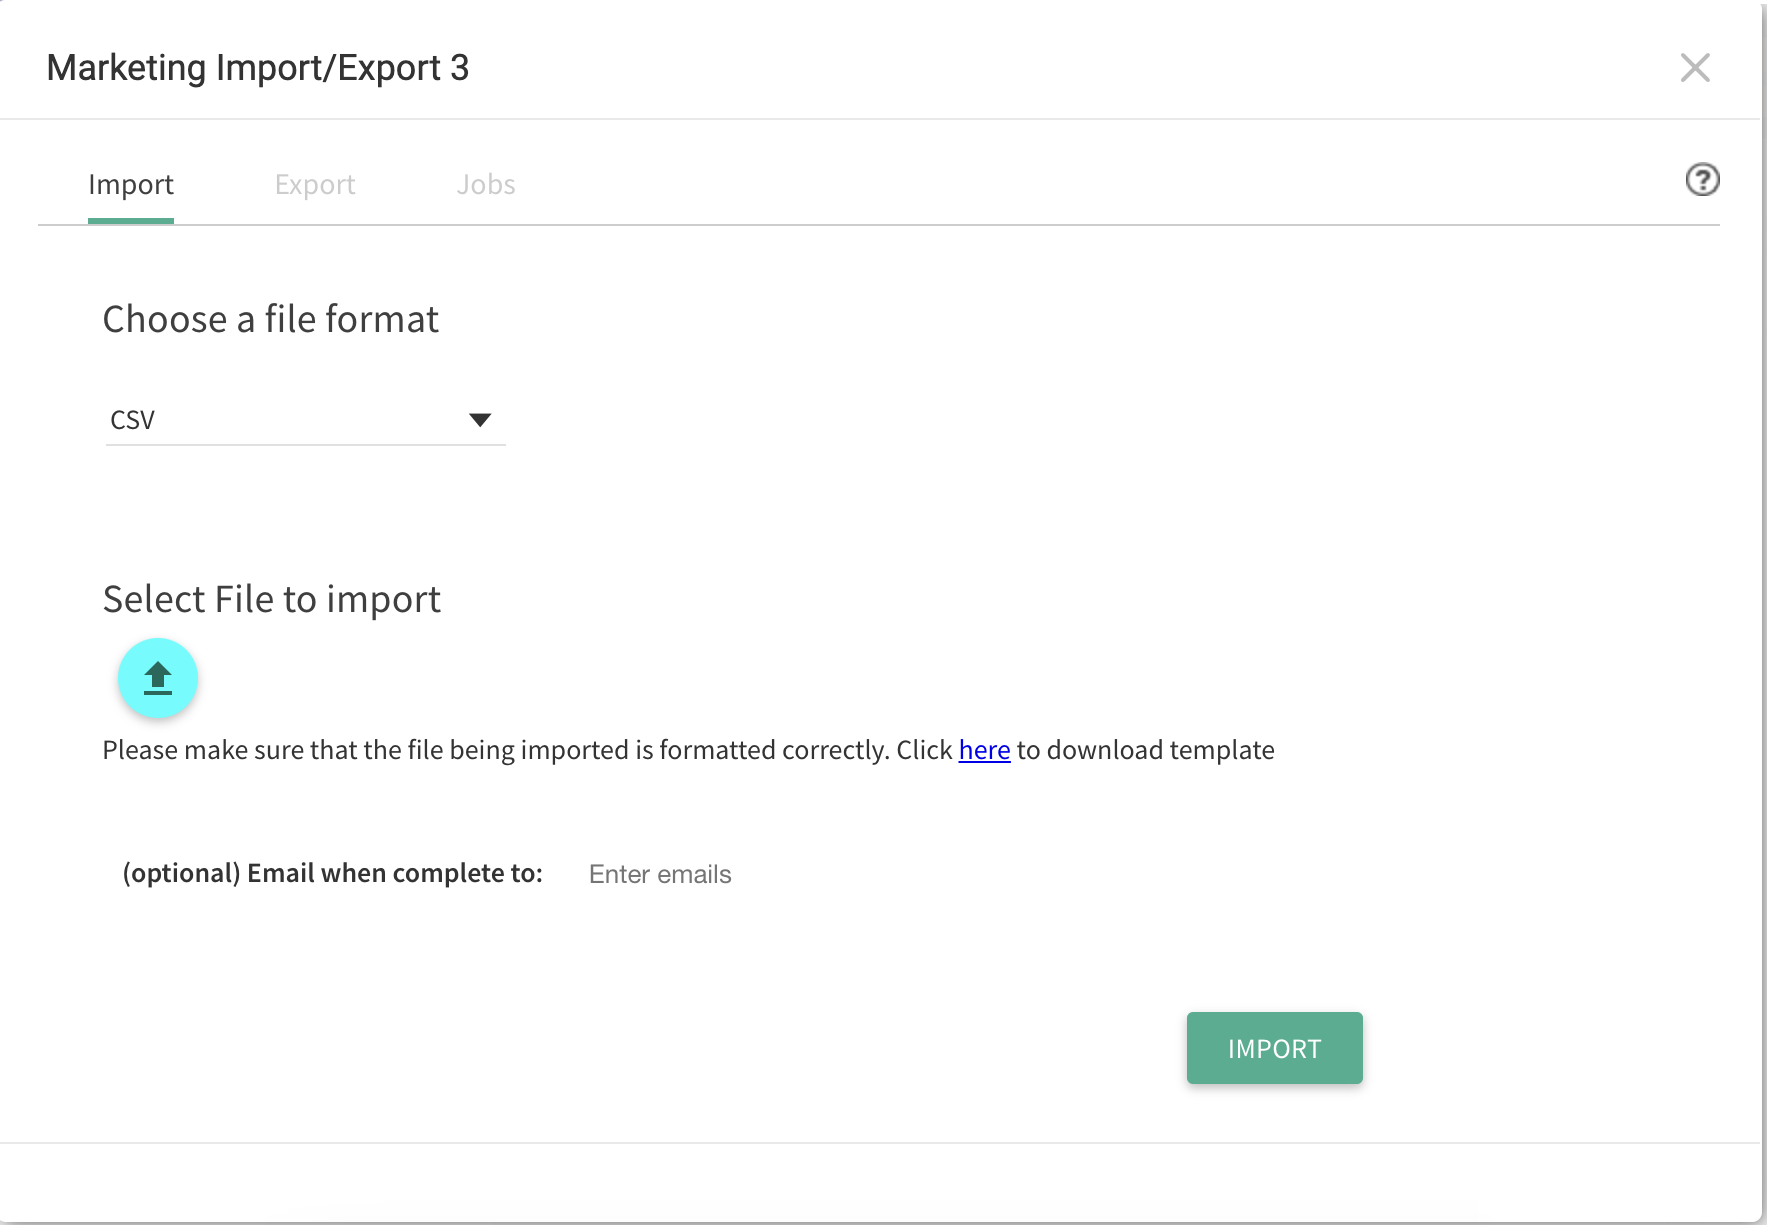 The Import tab of the import-export tool